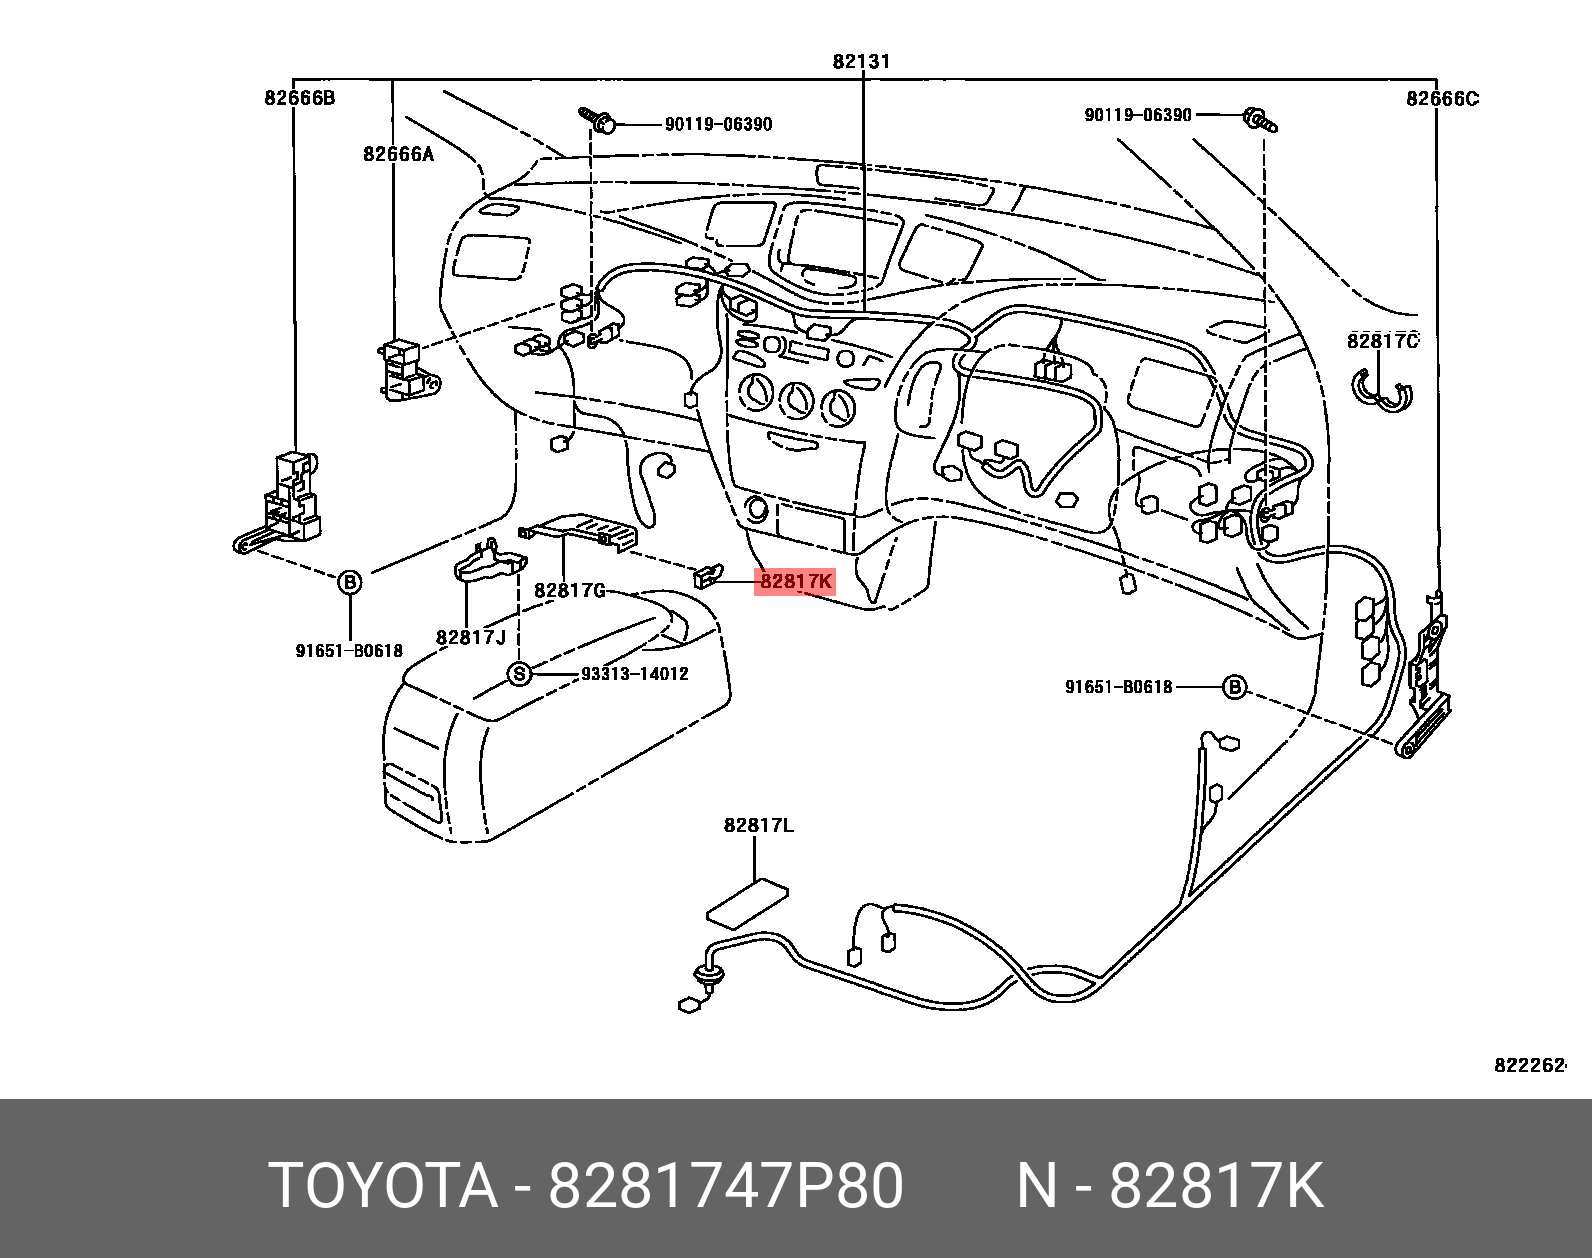 PRIUS 201511 -, PROTECTOR, WIRING HARNESS, NO.10